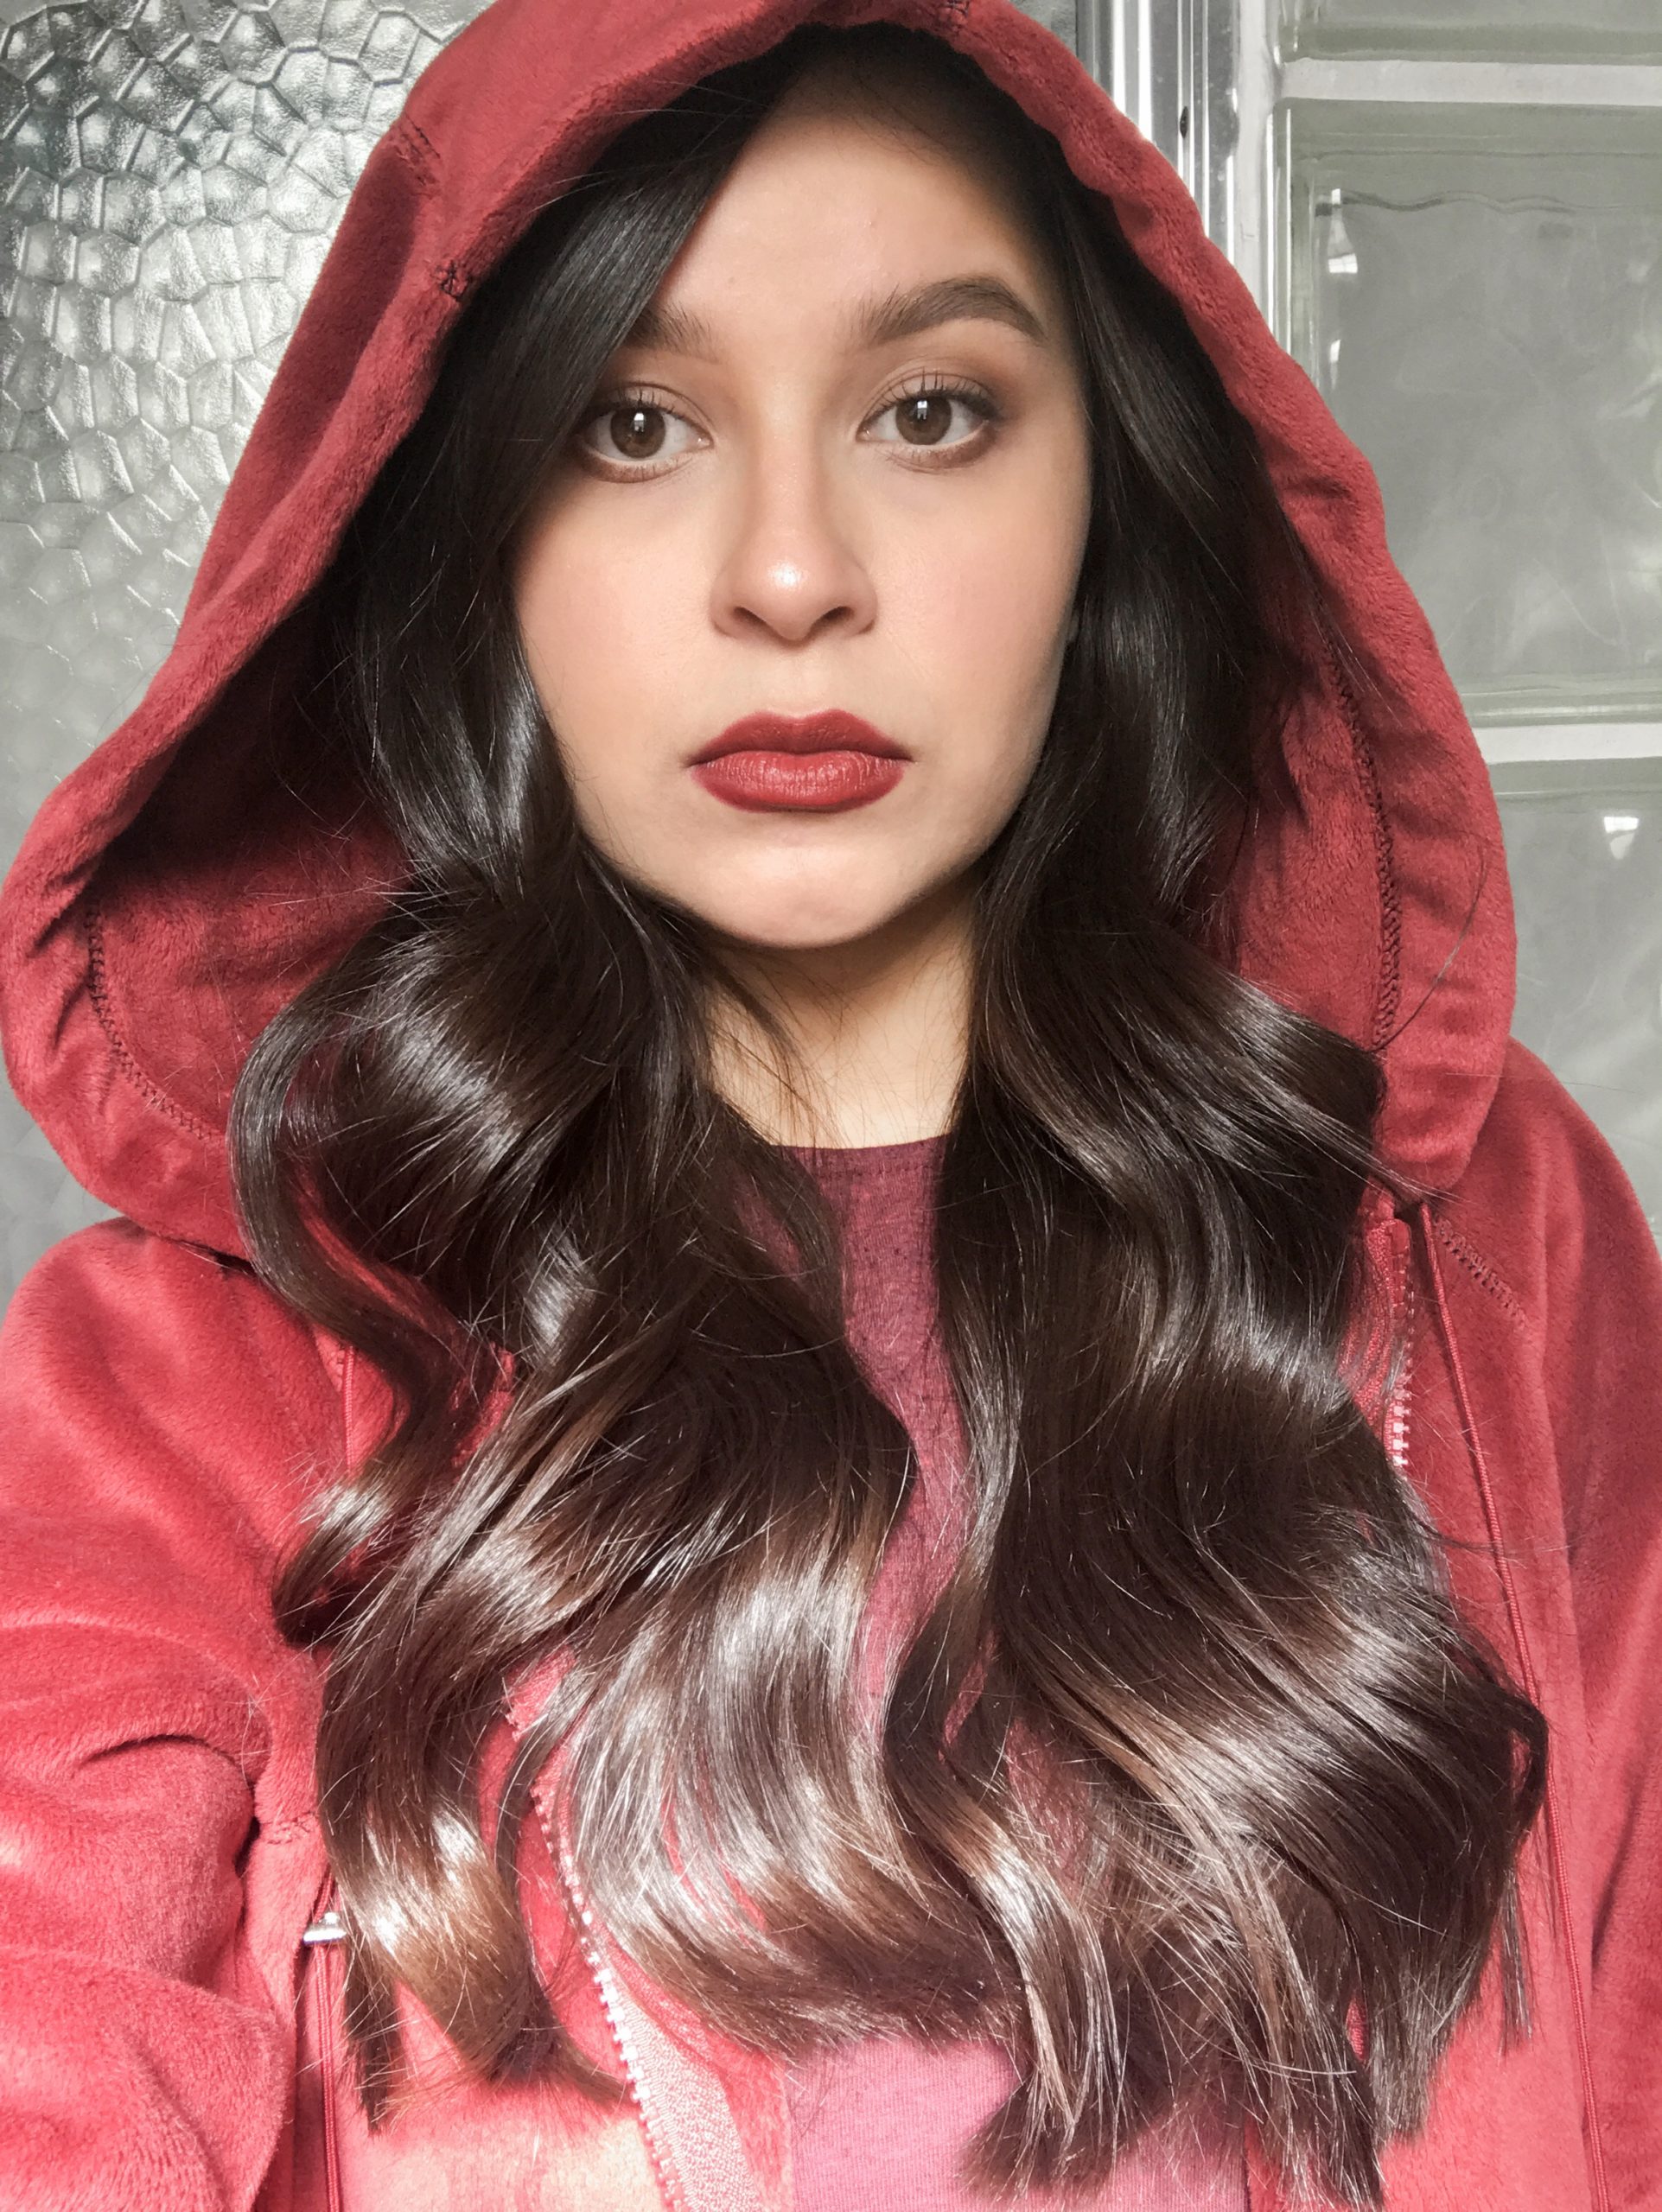 little-red-riding-hood-costume